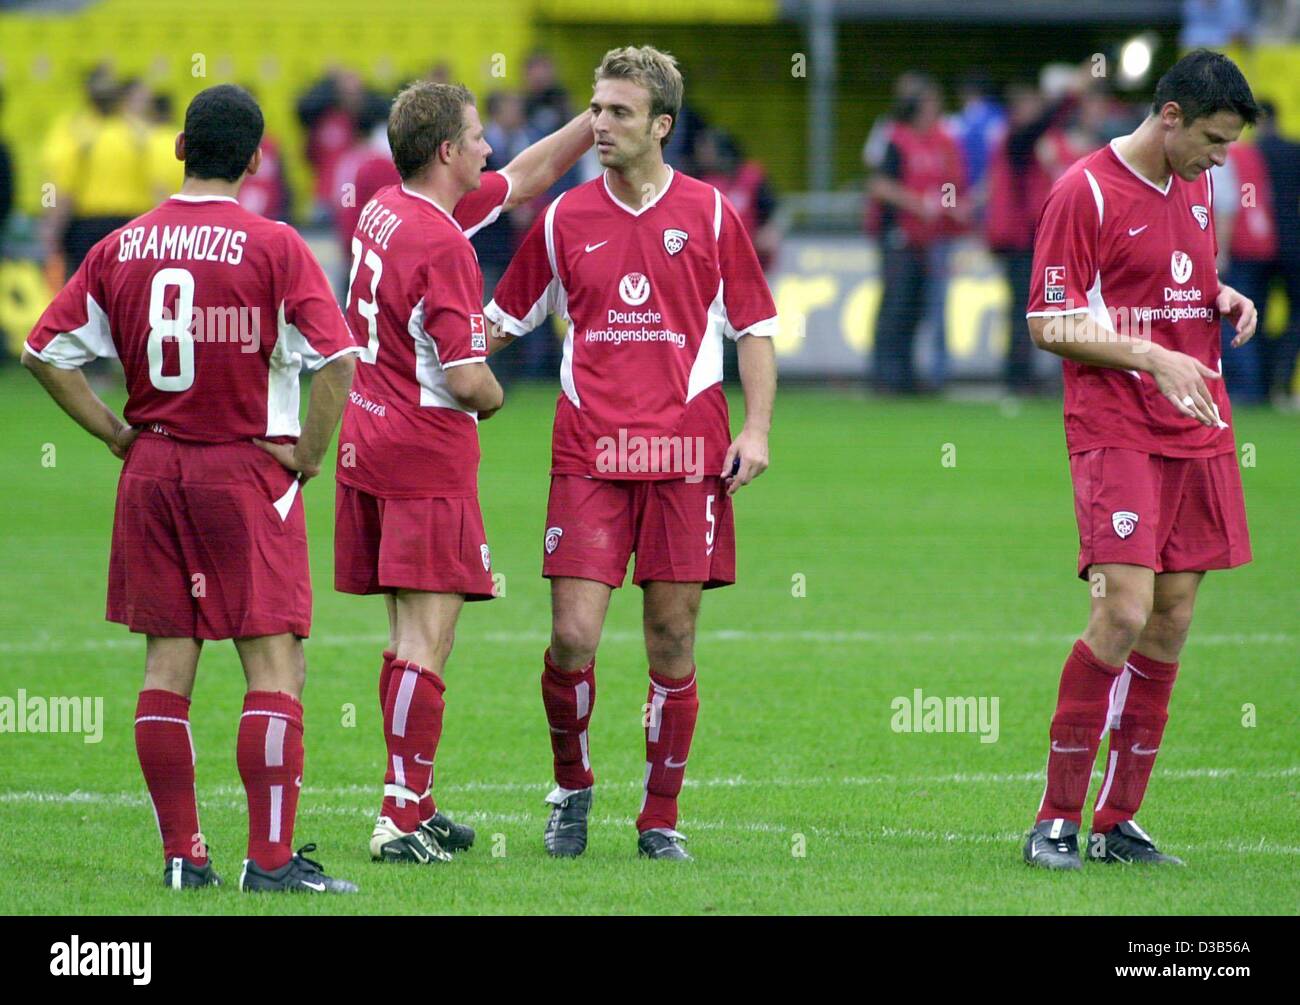 (dpa) - Kaiserslautern's players (L-R:) Dimitros Grammozis from Greece, Thomas Riedl, Thomas Hengen and Alexander Knavs from Slovenia stand on the soccer pitch after the Bundesliga match against 1860 Munich ended in a goalless tie, in Kaiserslautern, Germany, 21 September 2002. Stock Photo